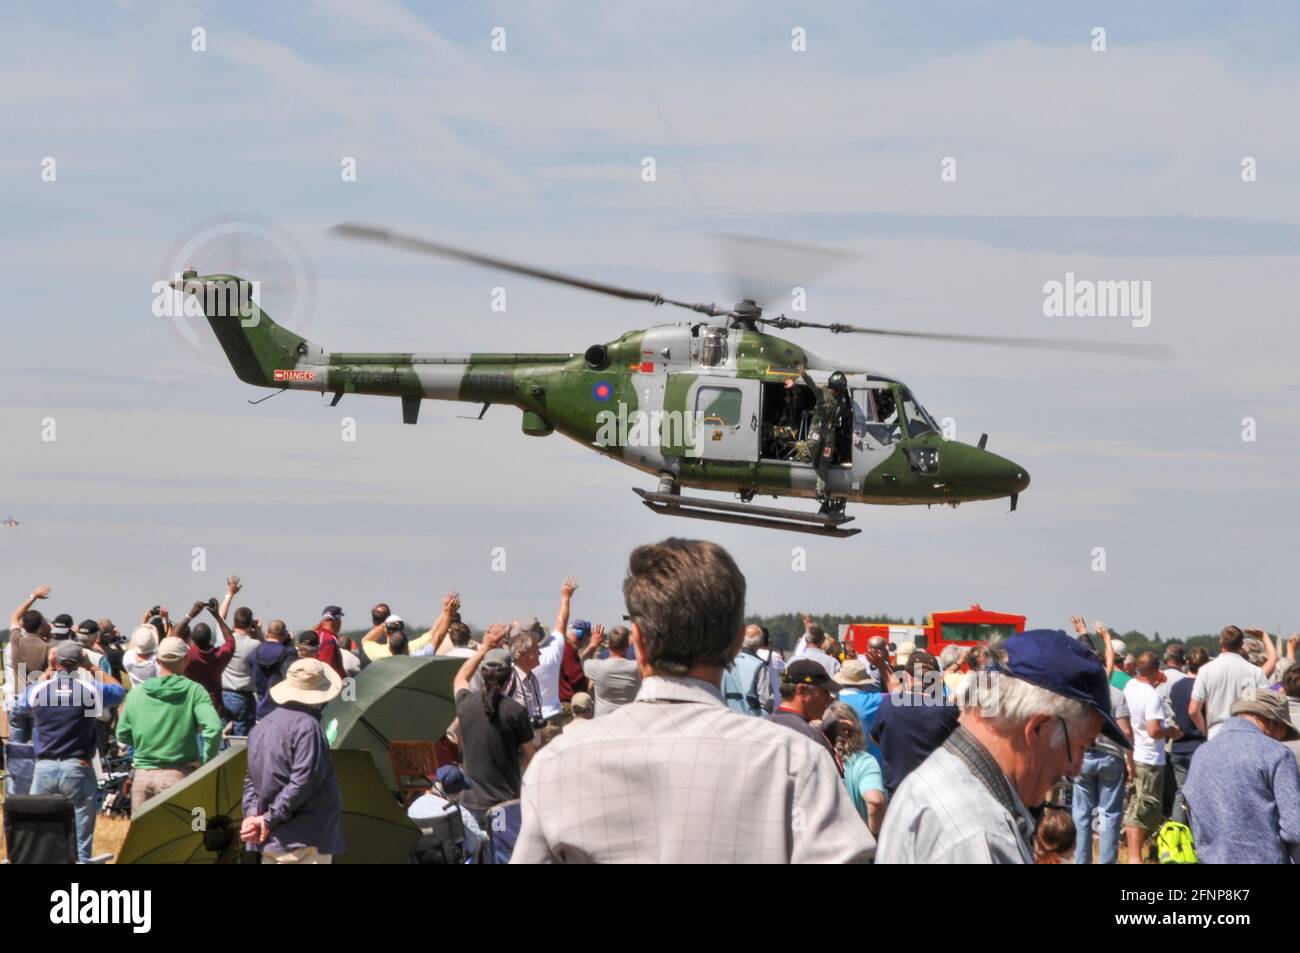 British Army, Army Air Corps Westland Lynx AH.7 helicopter ZD284 departing at Royal International Air Tattoo, RIAT, RAF Fairford, UK. Crowd waving Stock Photo